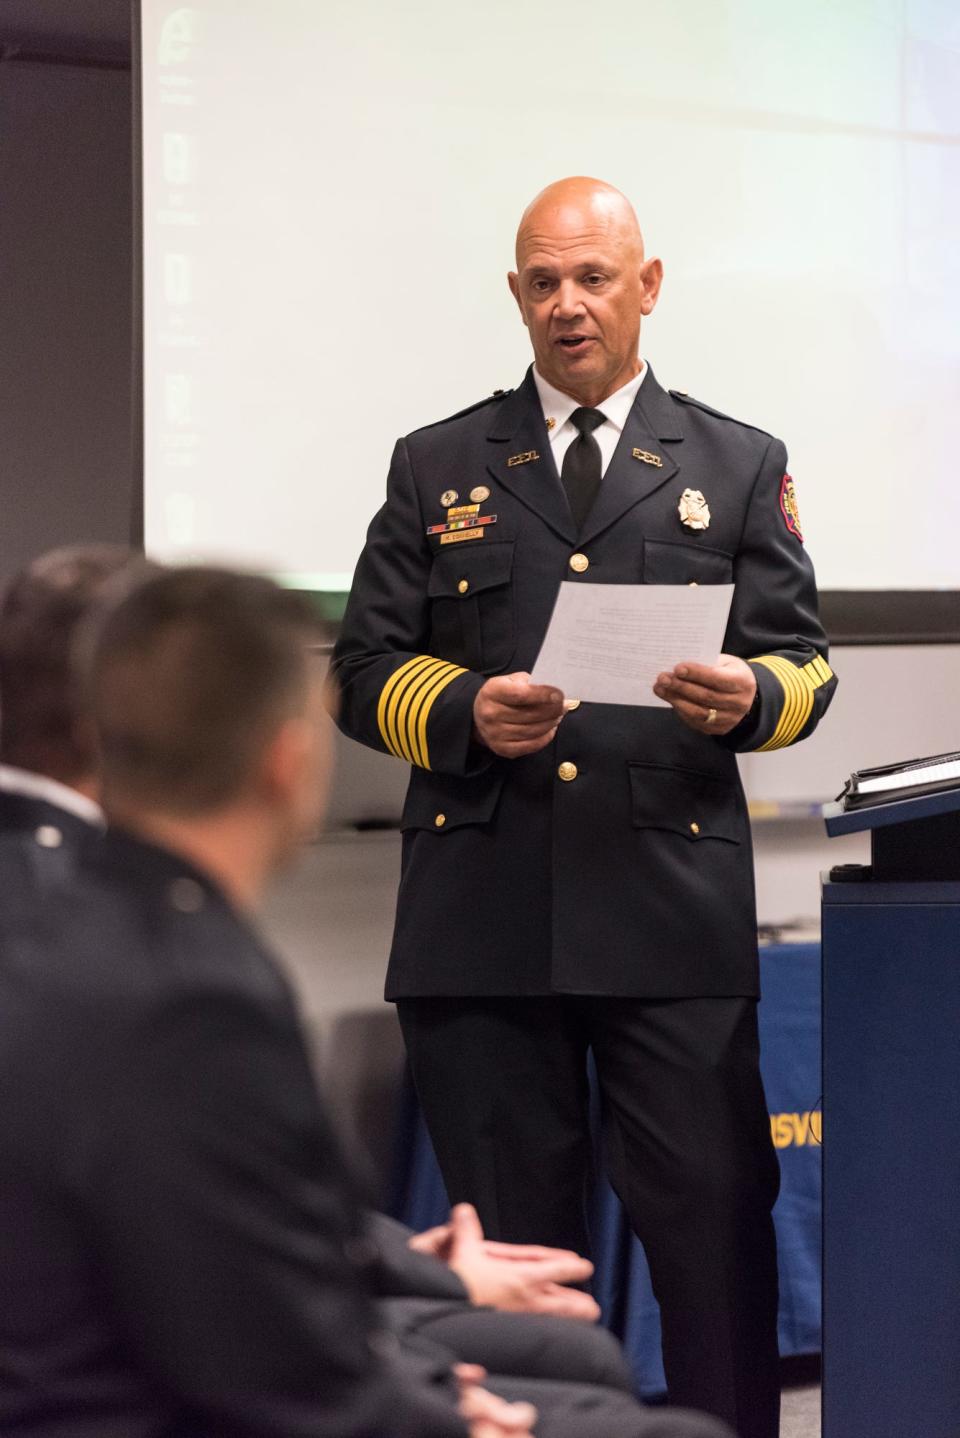 Former Evansville Fire Chief Mike Connelly in a 2018 ceremony.